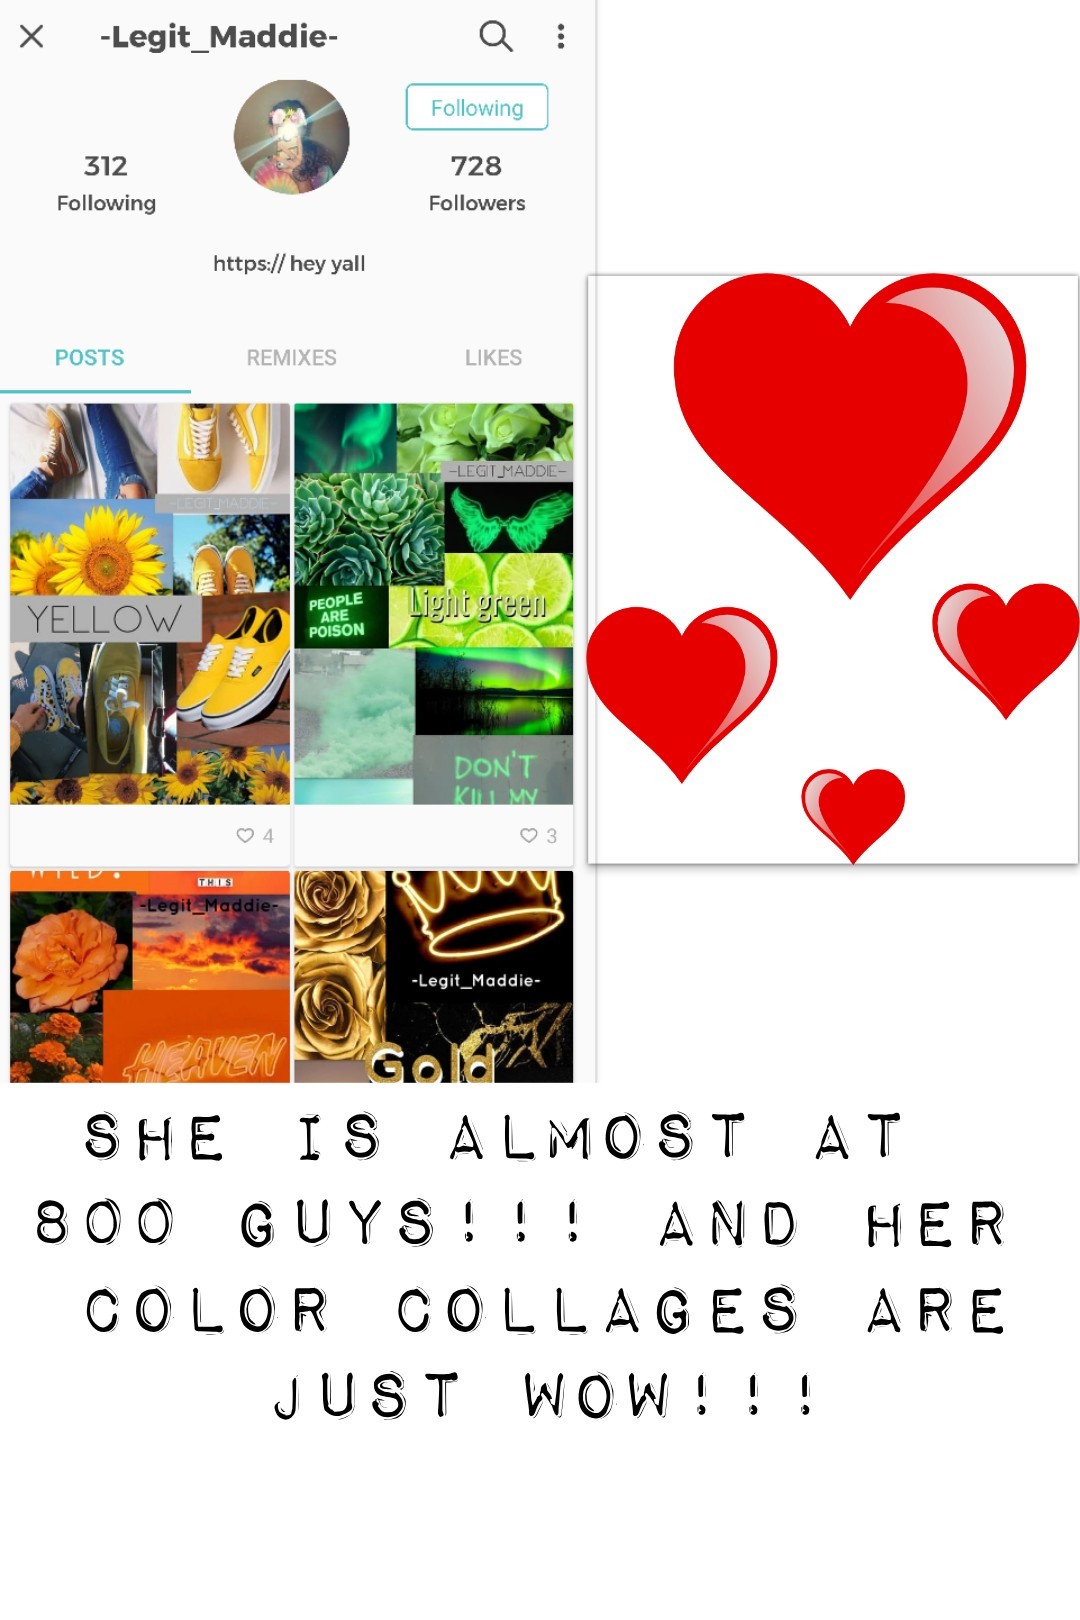 She is almost at 800 guys!!! And her color collages are just WOW!!!